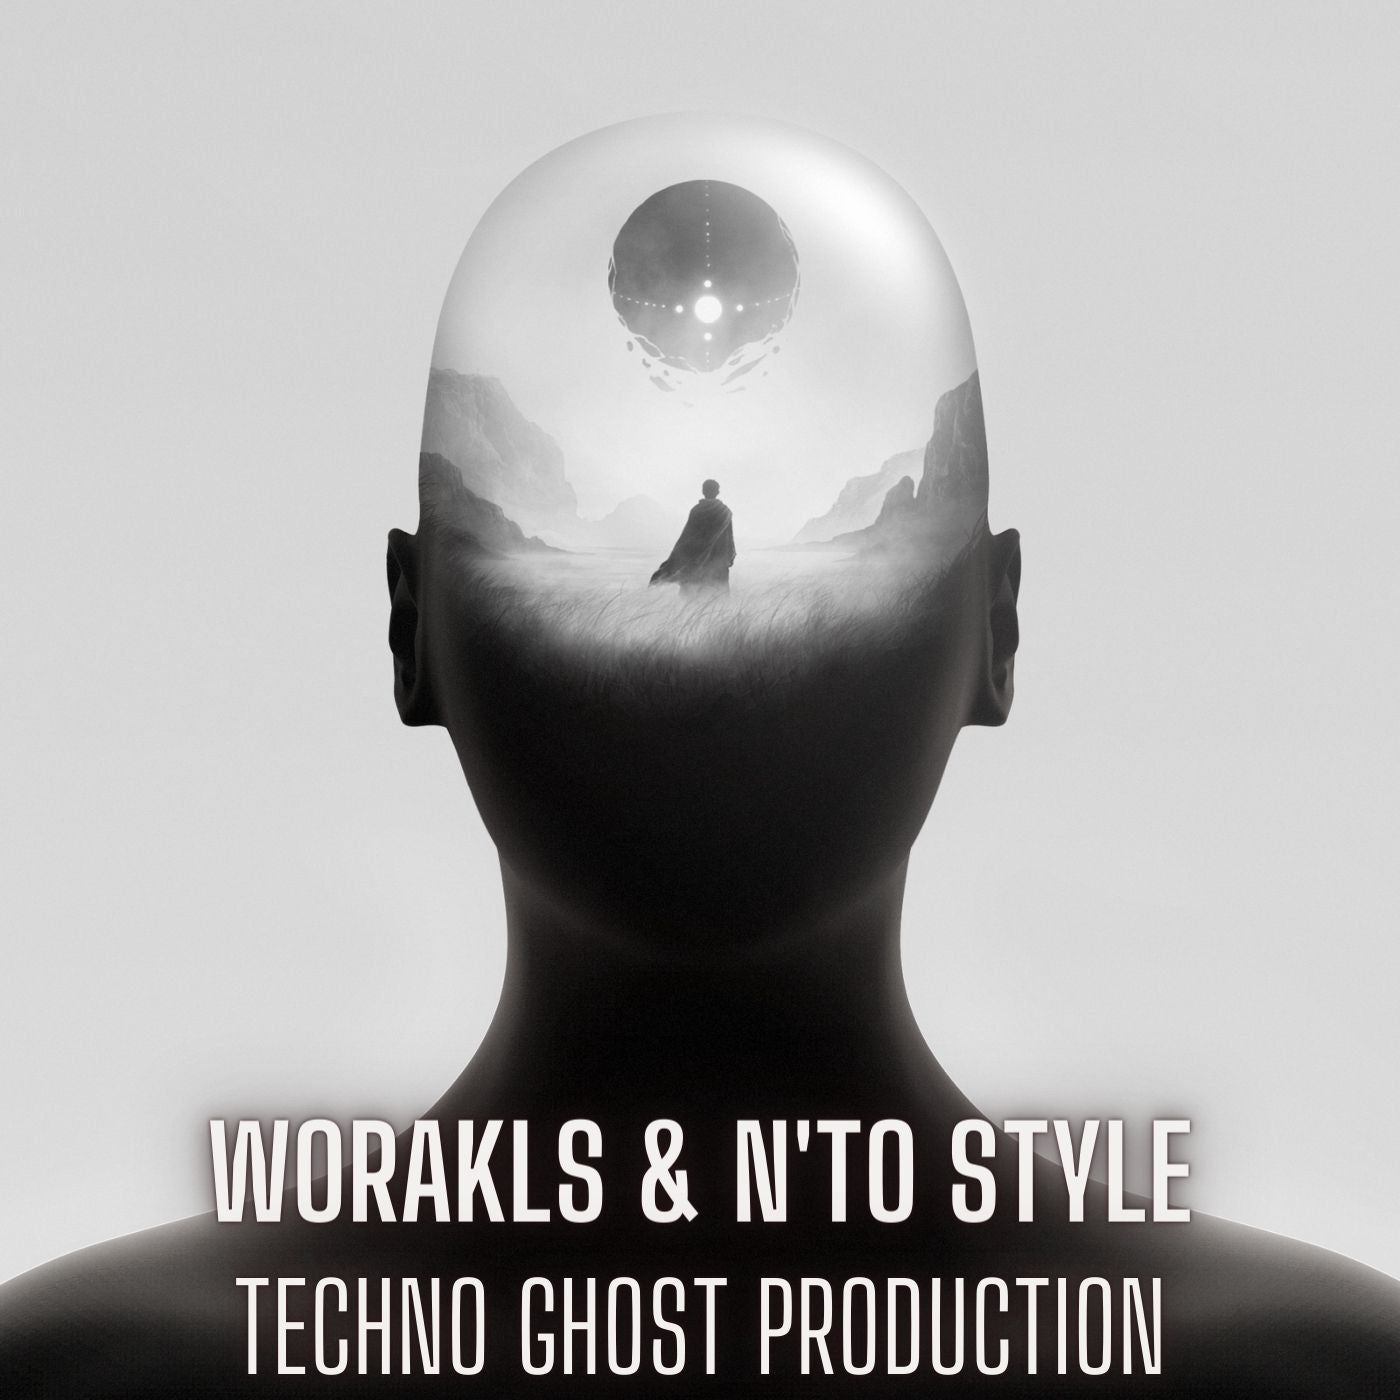 Worakls & N'to Style Melodic Techno Ghost Production